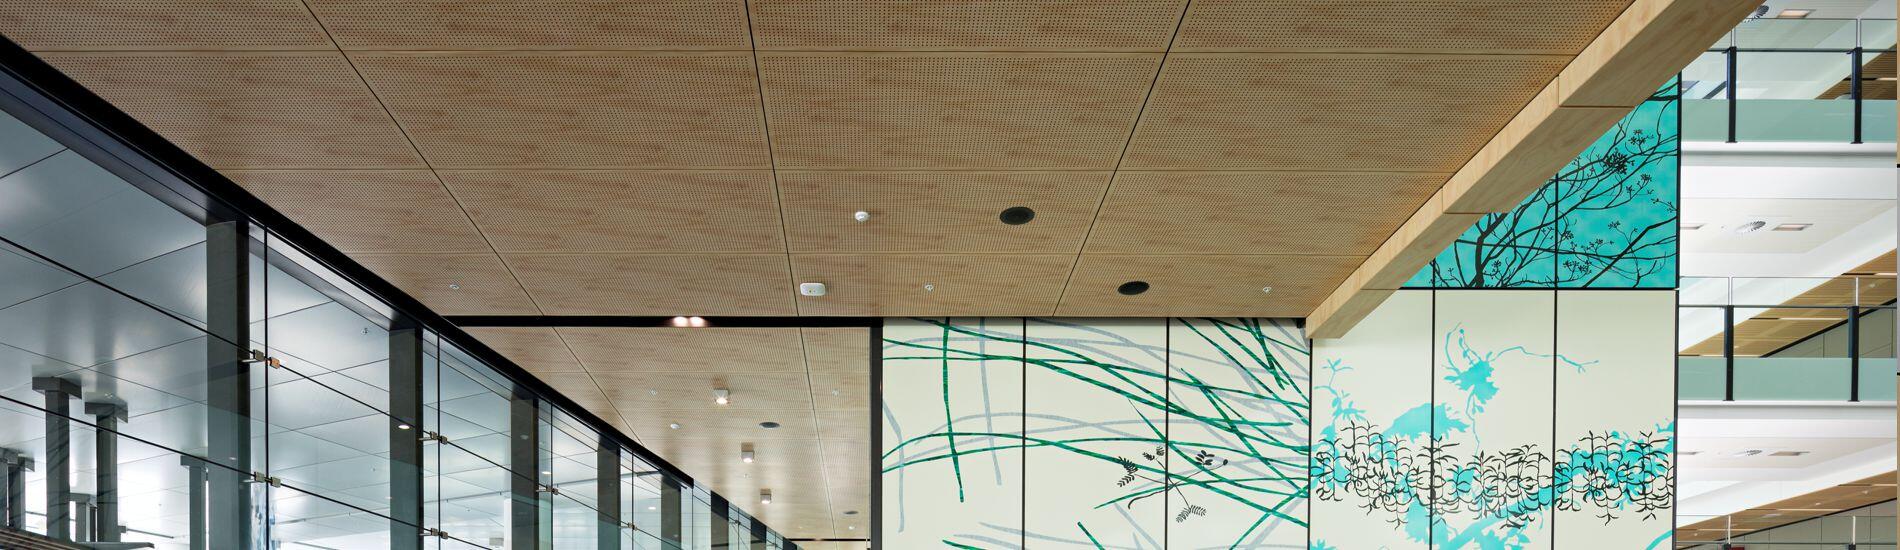 SUPACOUSTIC acoustic wall and ceiling panels meet fire hazard requirements for hospital atrium